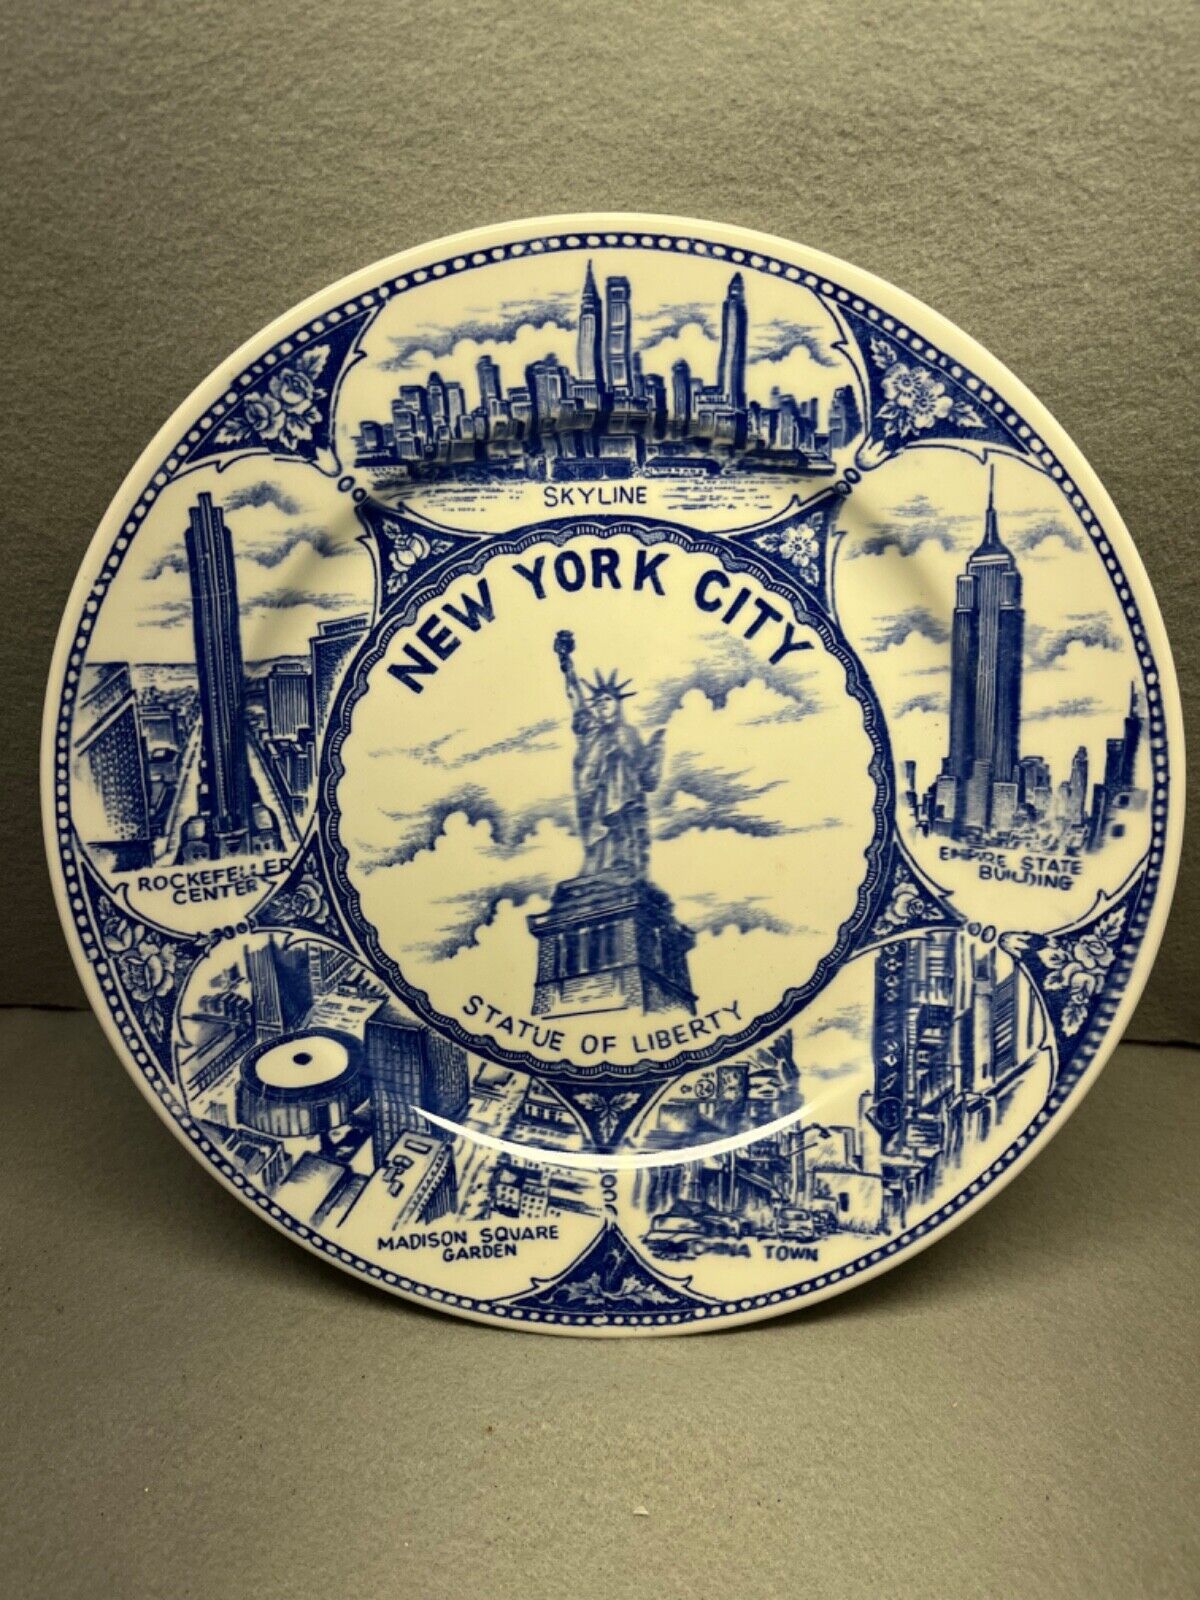 VINTAGE LHC NYC BLUE & WHITE COLLECTOR PLATE Statue of Liberty MSG Empire State